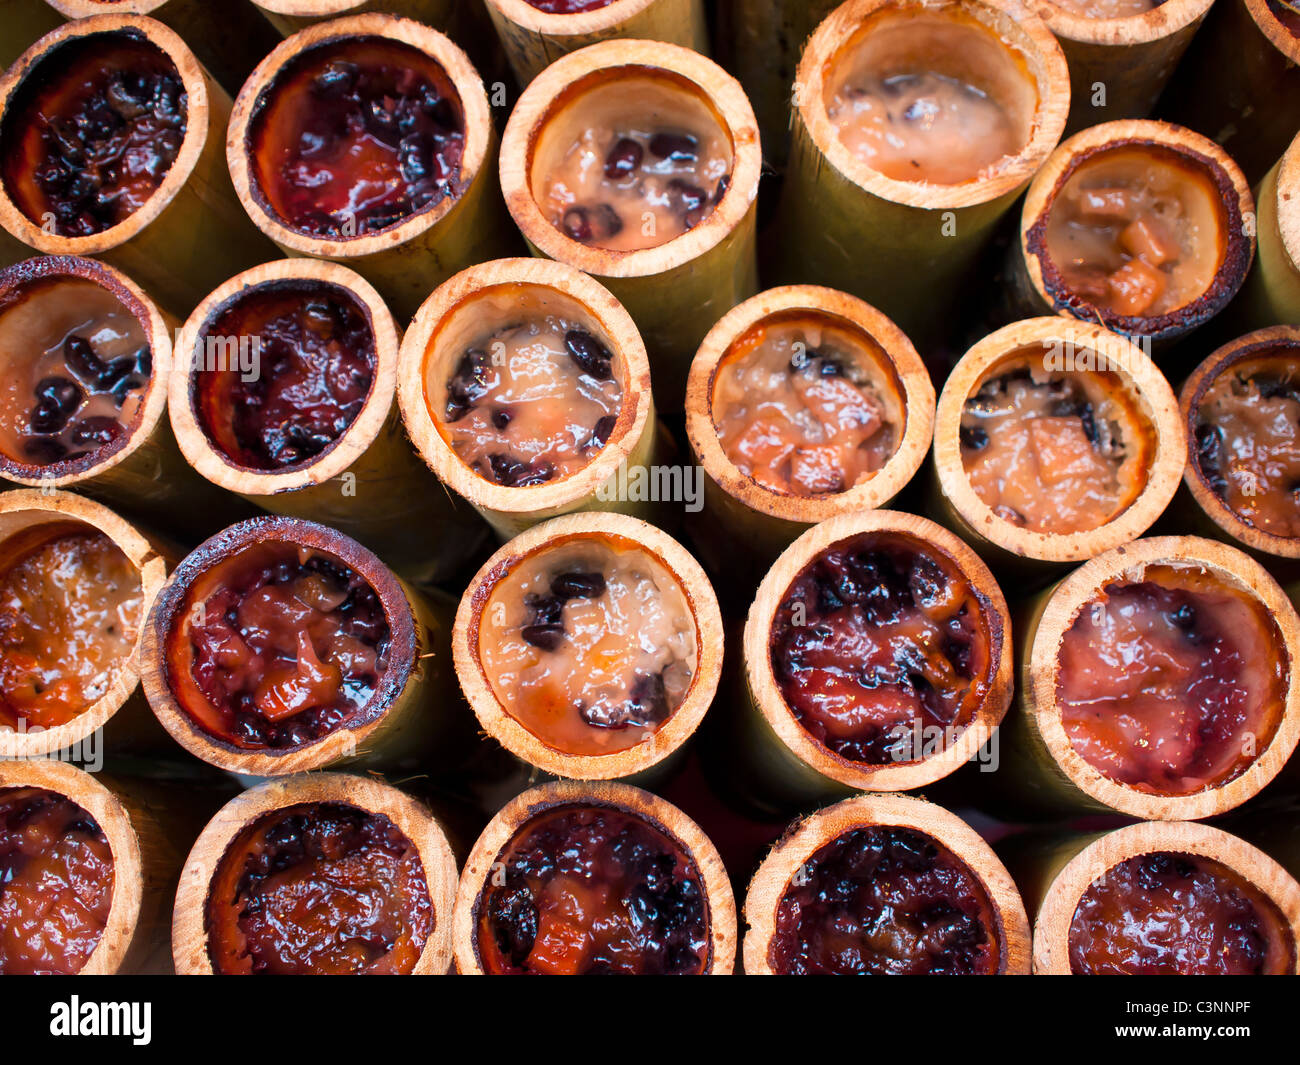 khao lam – sticky rice cooked in a bamboo tube. Stock Photo